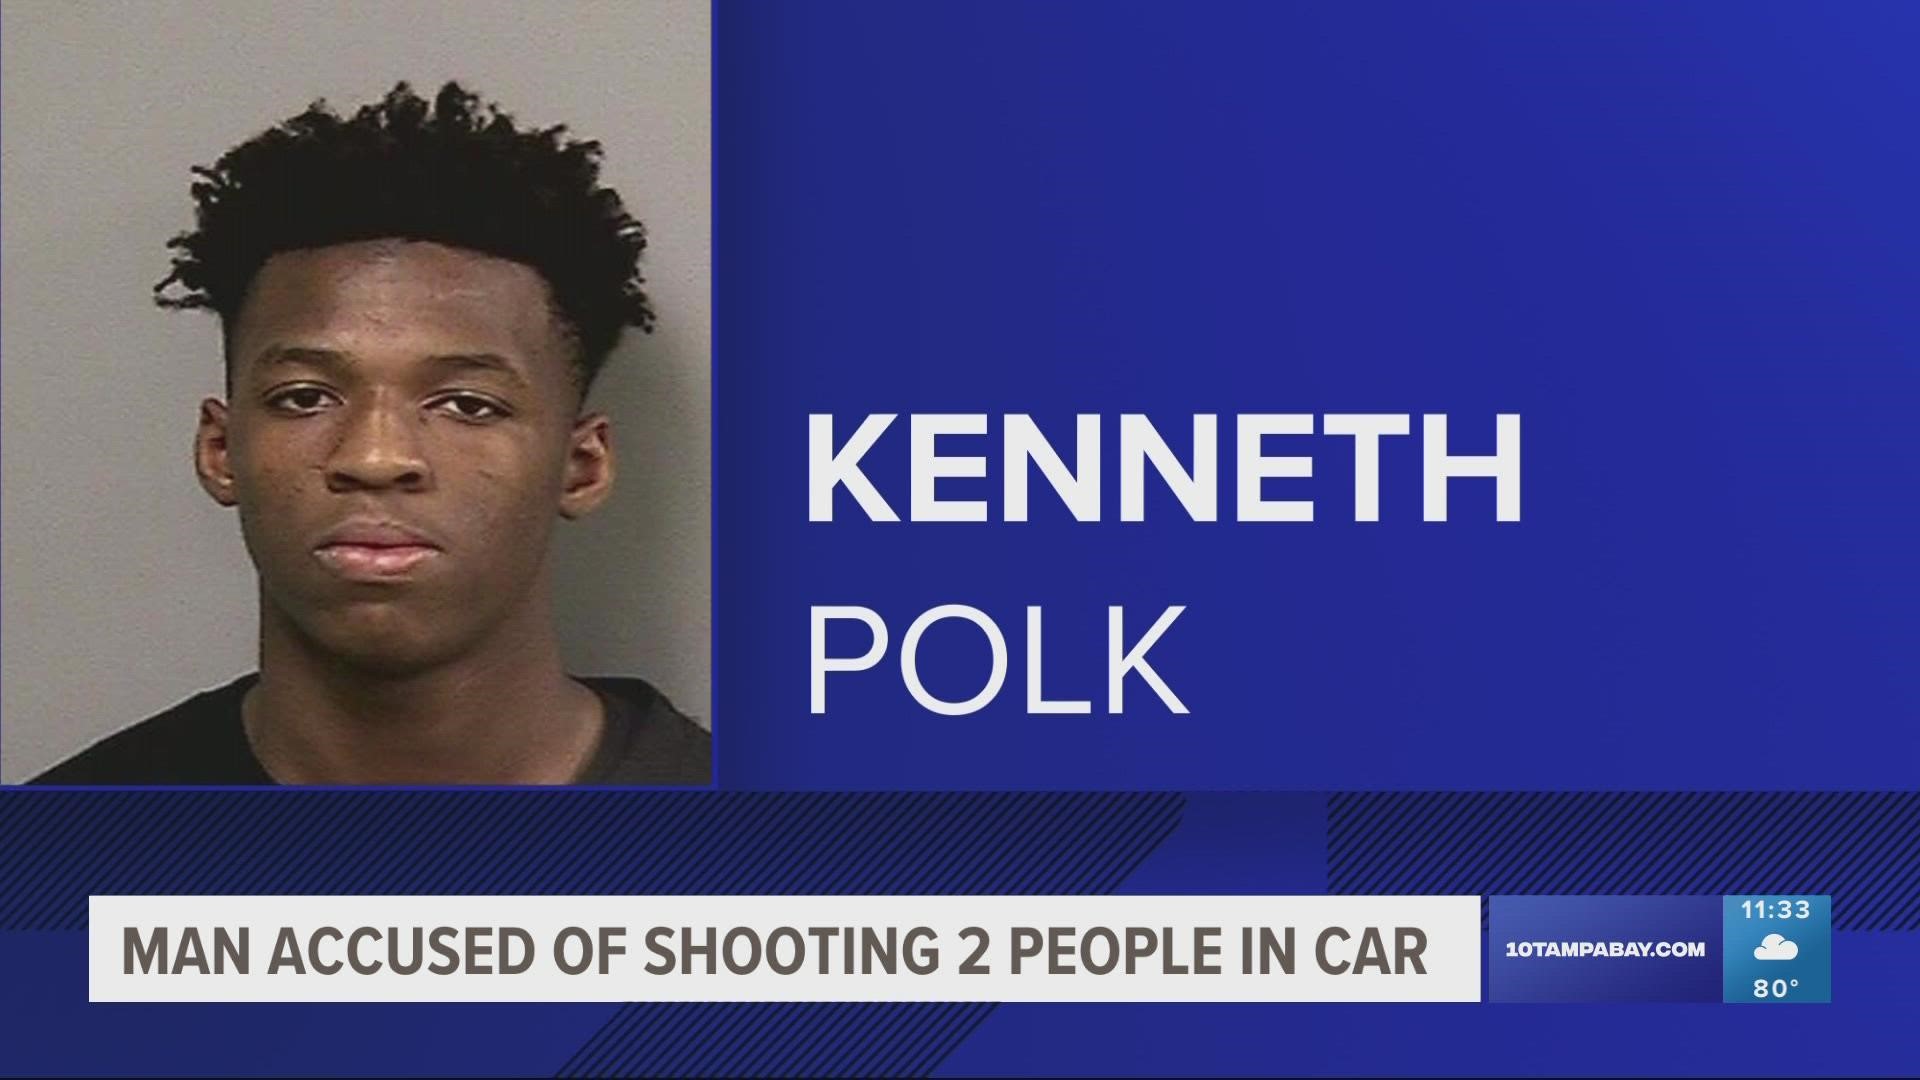 Kenneth Polk is reportedly charged with second-degree murder and attempted murder.